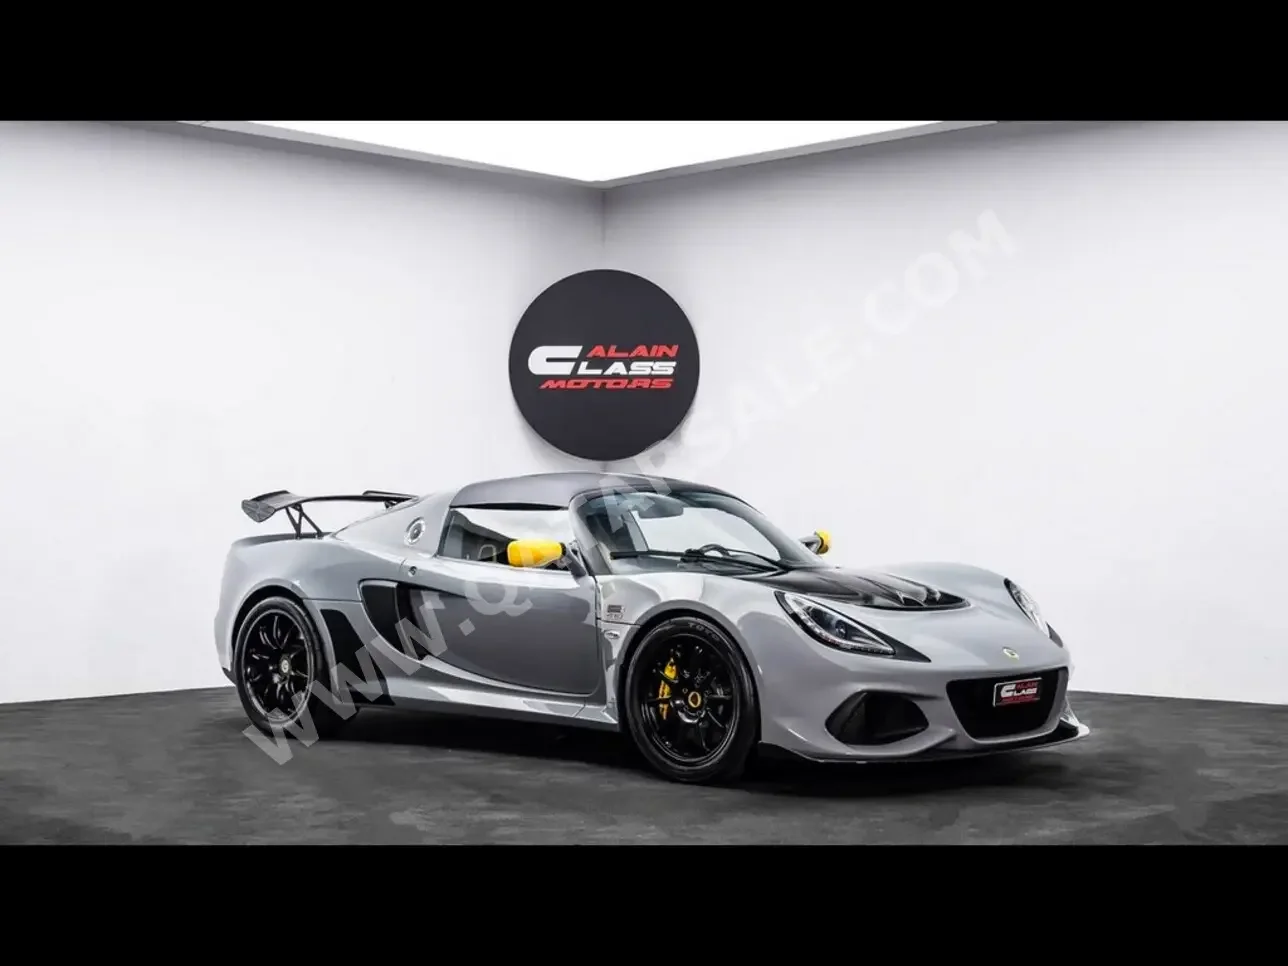 Lotus  Exige  410 Sport  2020  Automatic  35,248 Km  6 Cylinder  All Wheel Drive (AWD)  Coupe / Sport  Gray and Black